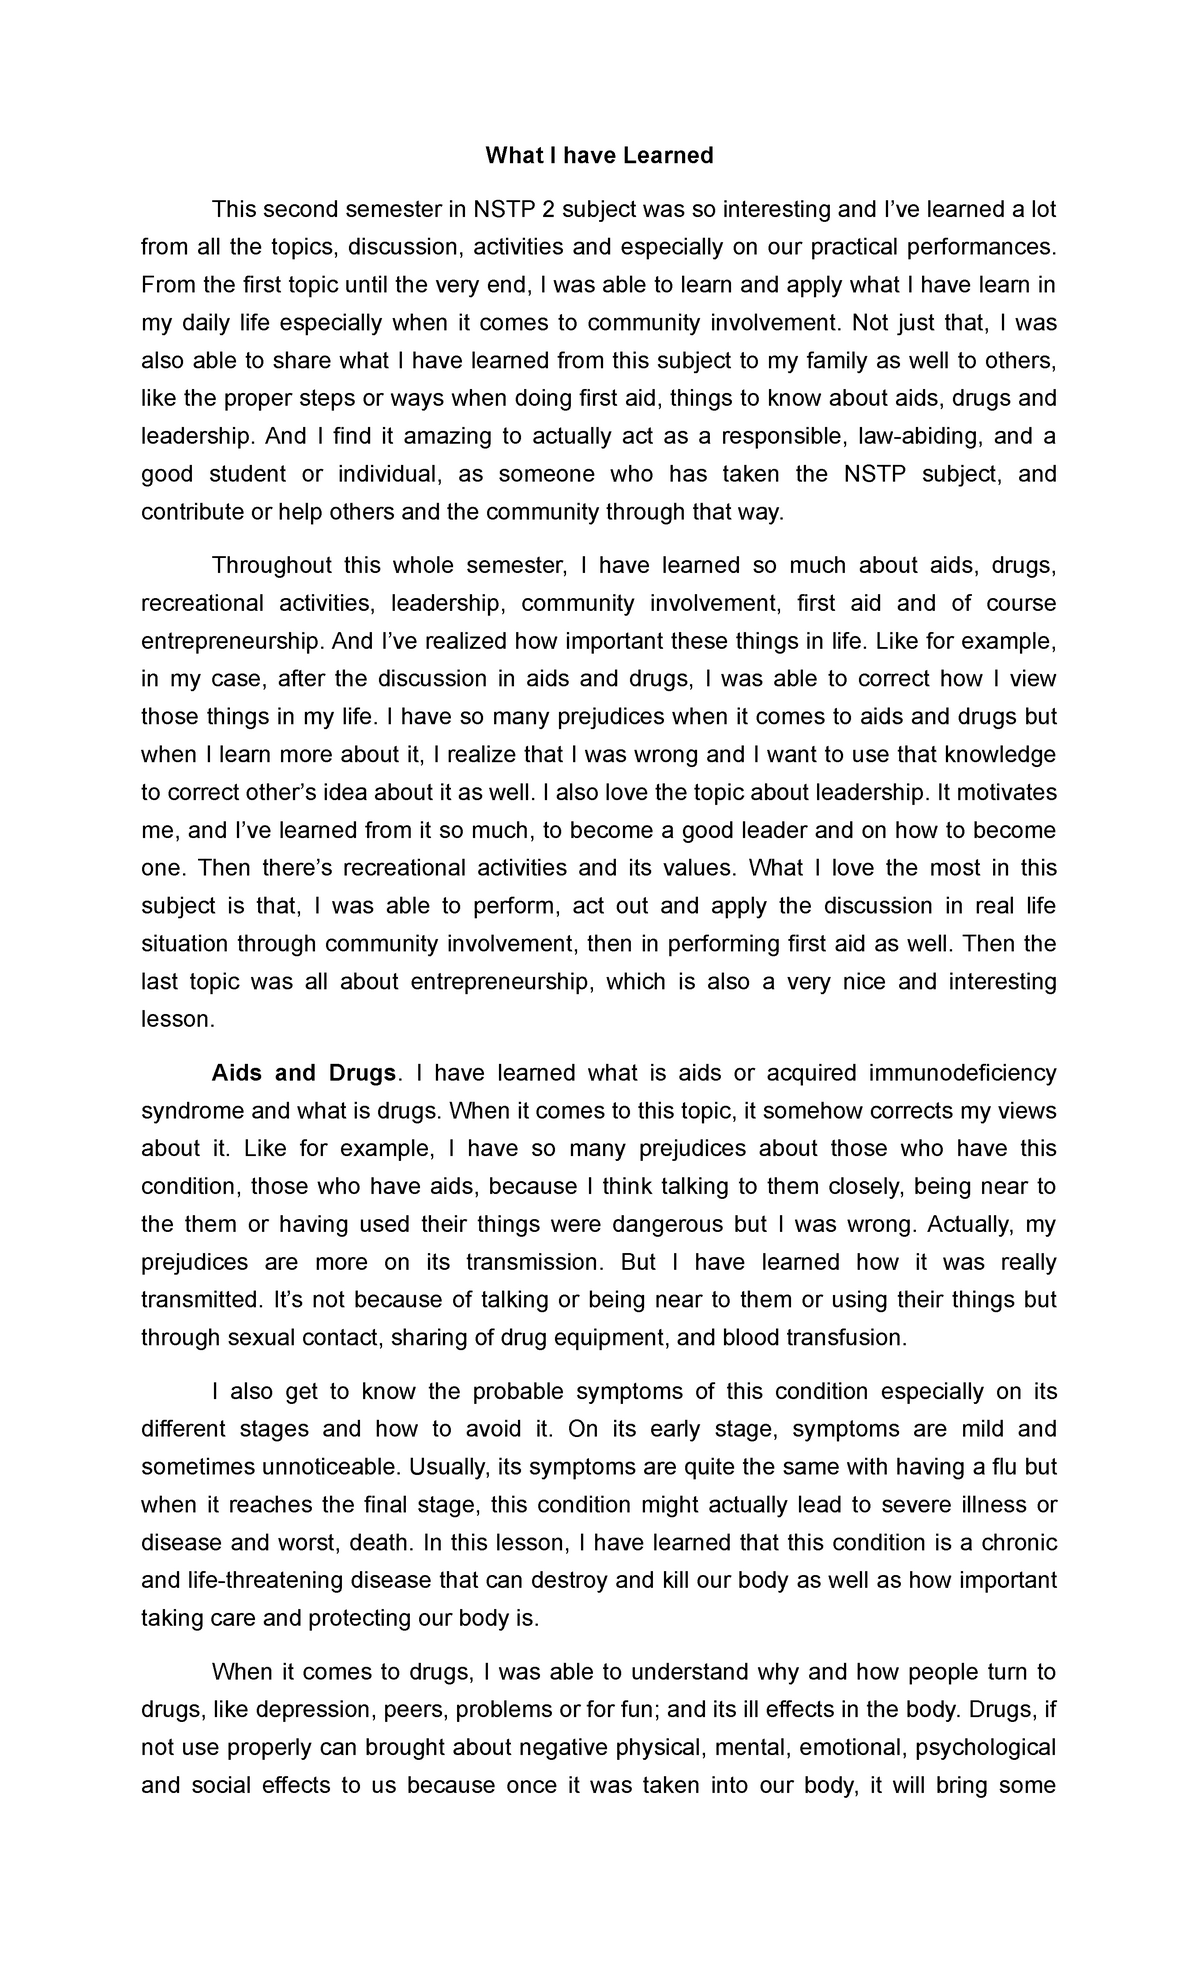 what have you learned about business so far essay